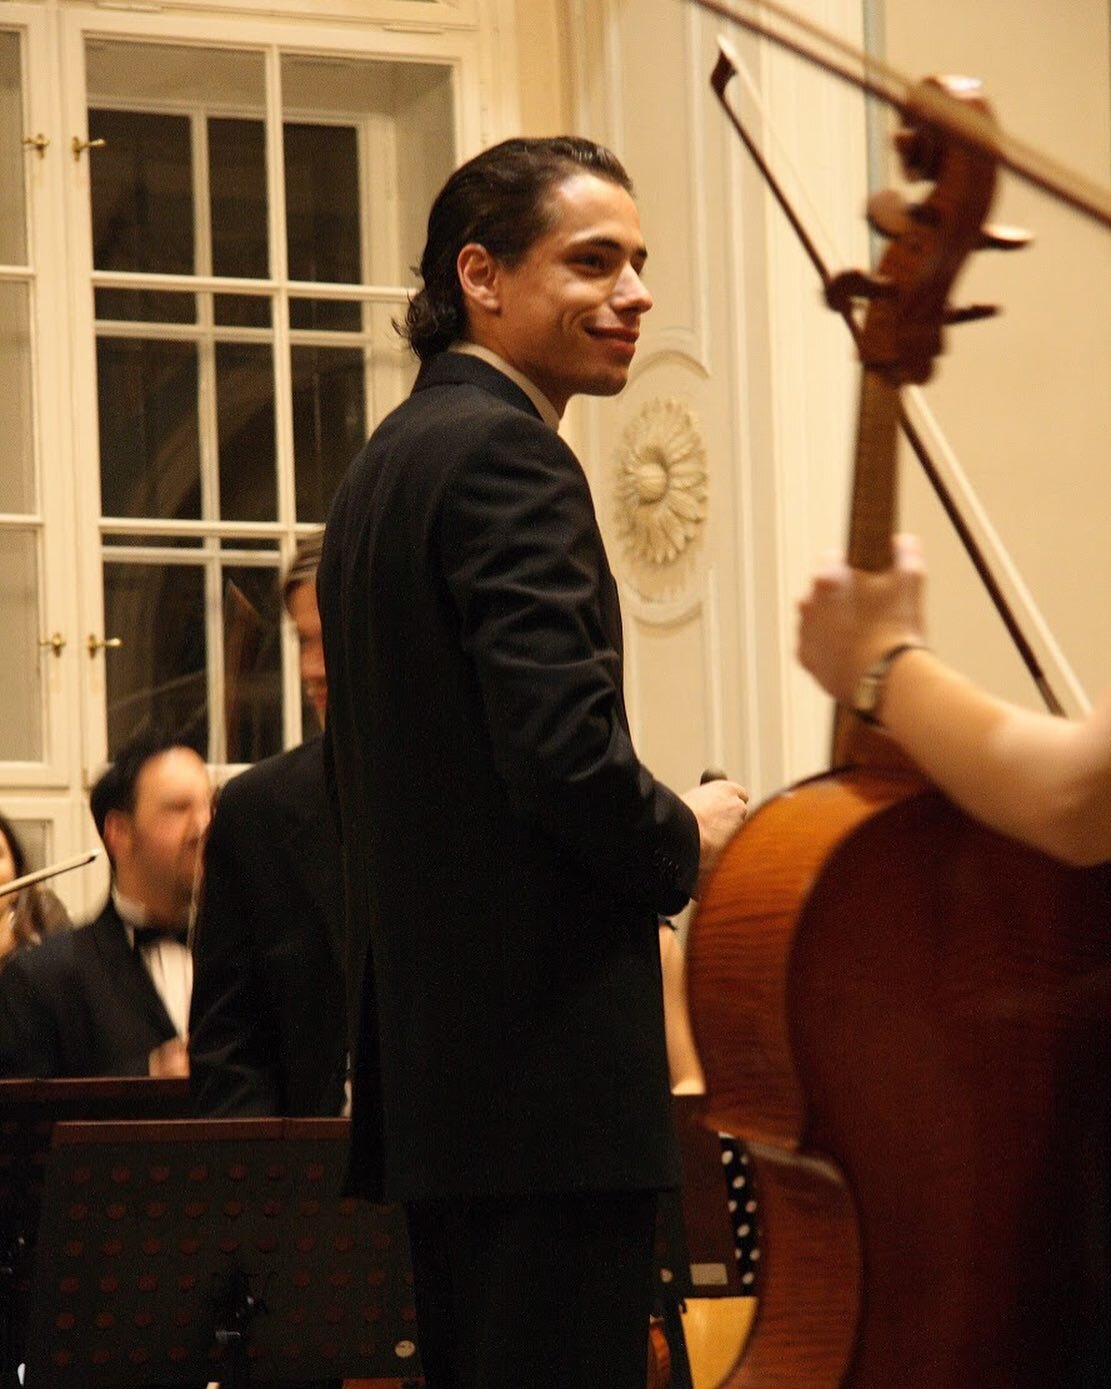 Just look at that hair... early 2007! My first concert in Prague!
There is a big advantage when you are conducting with long hair... or any hair at all. The sweat doesn&rsquo;t free fall into your eyes... and it burns! They are kind of necessary when